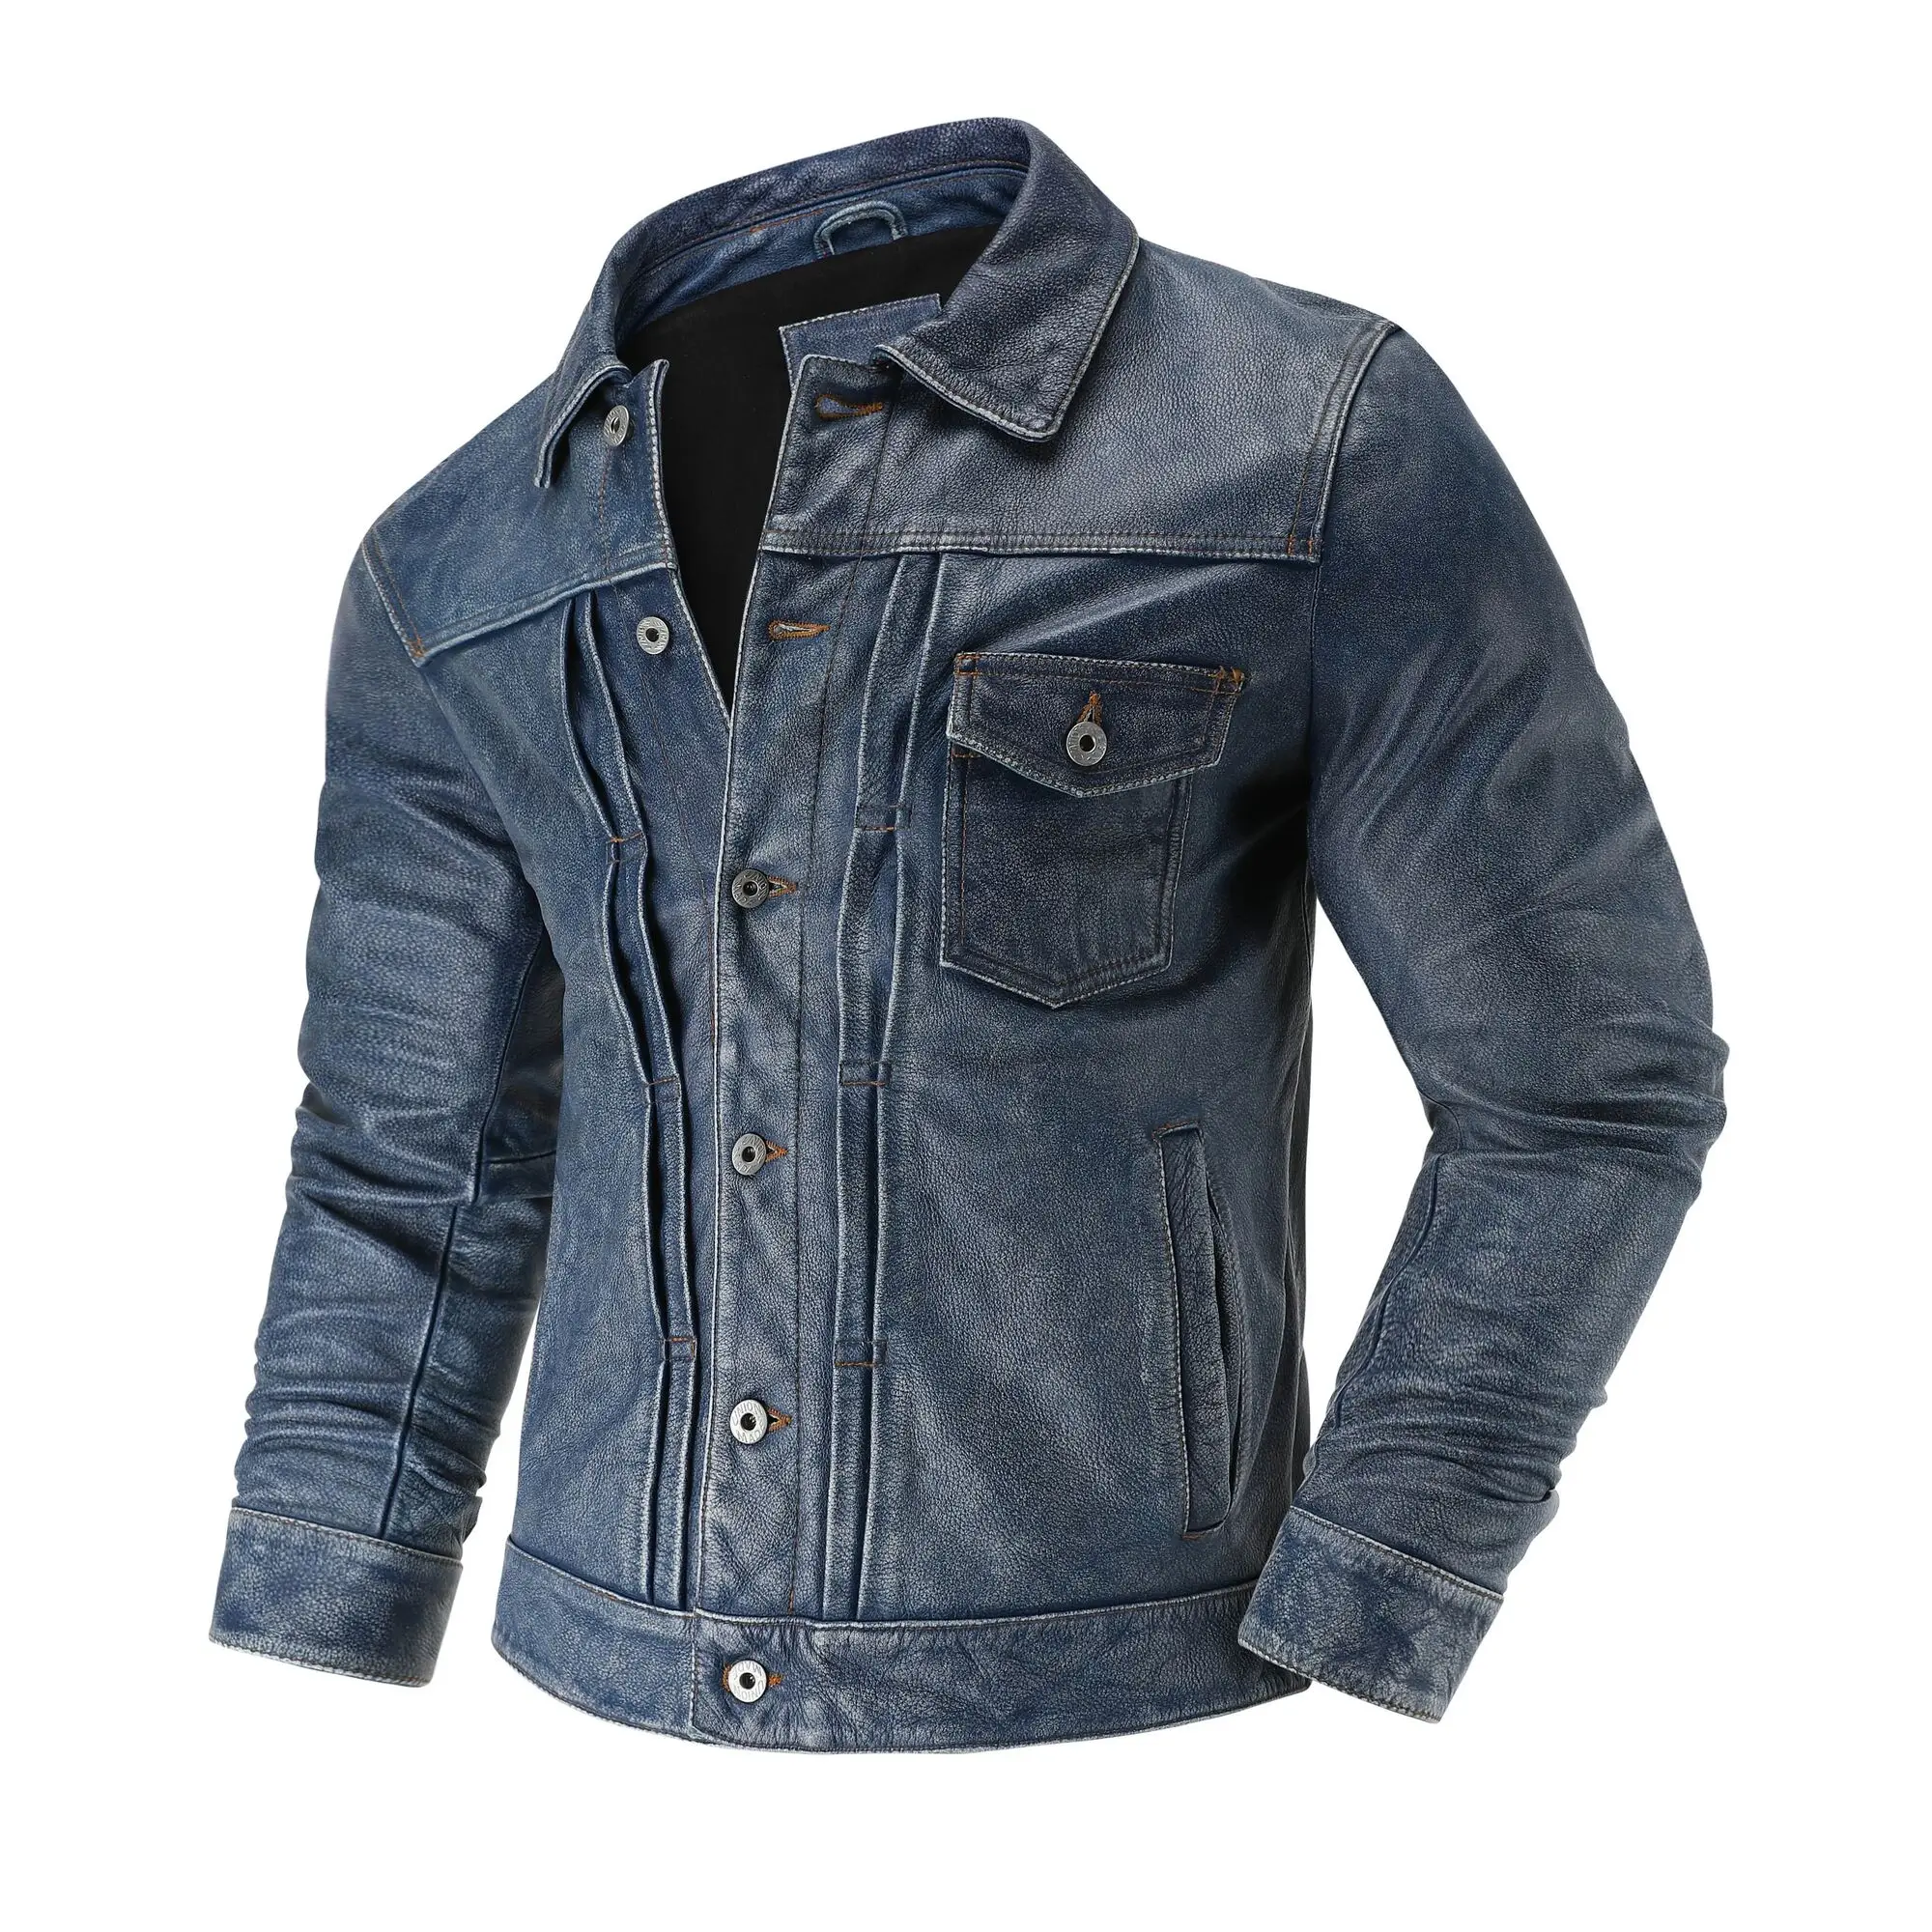 

American Casual Top Layer Cowhide Leather Jacket Denim Blue Retro Graphite Distressed Motorcycle Leather Jacket Men's Short